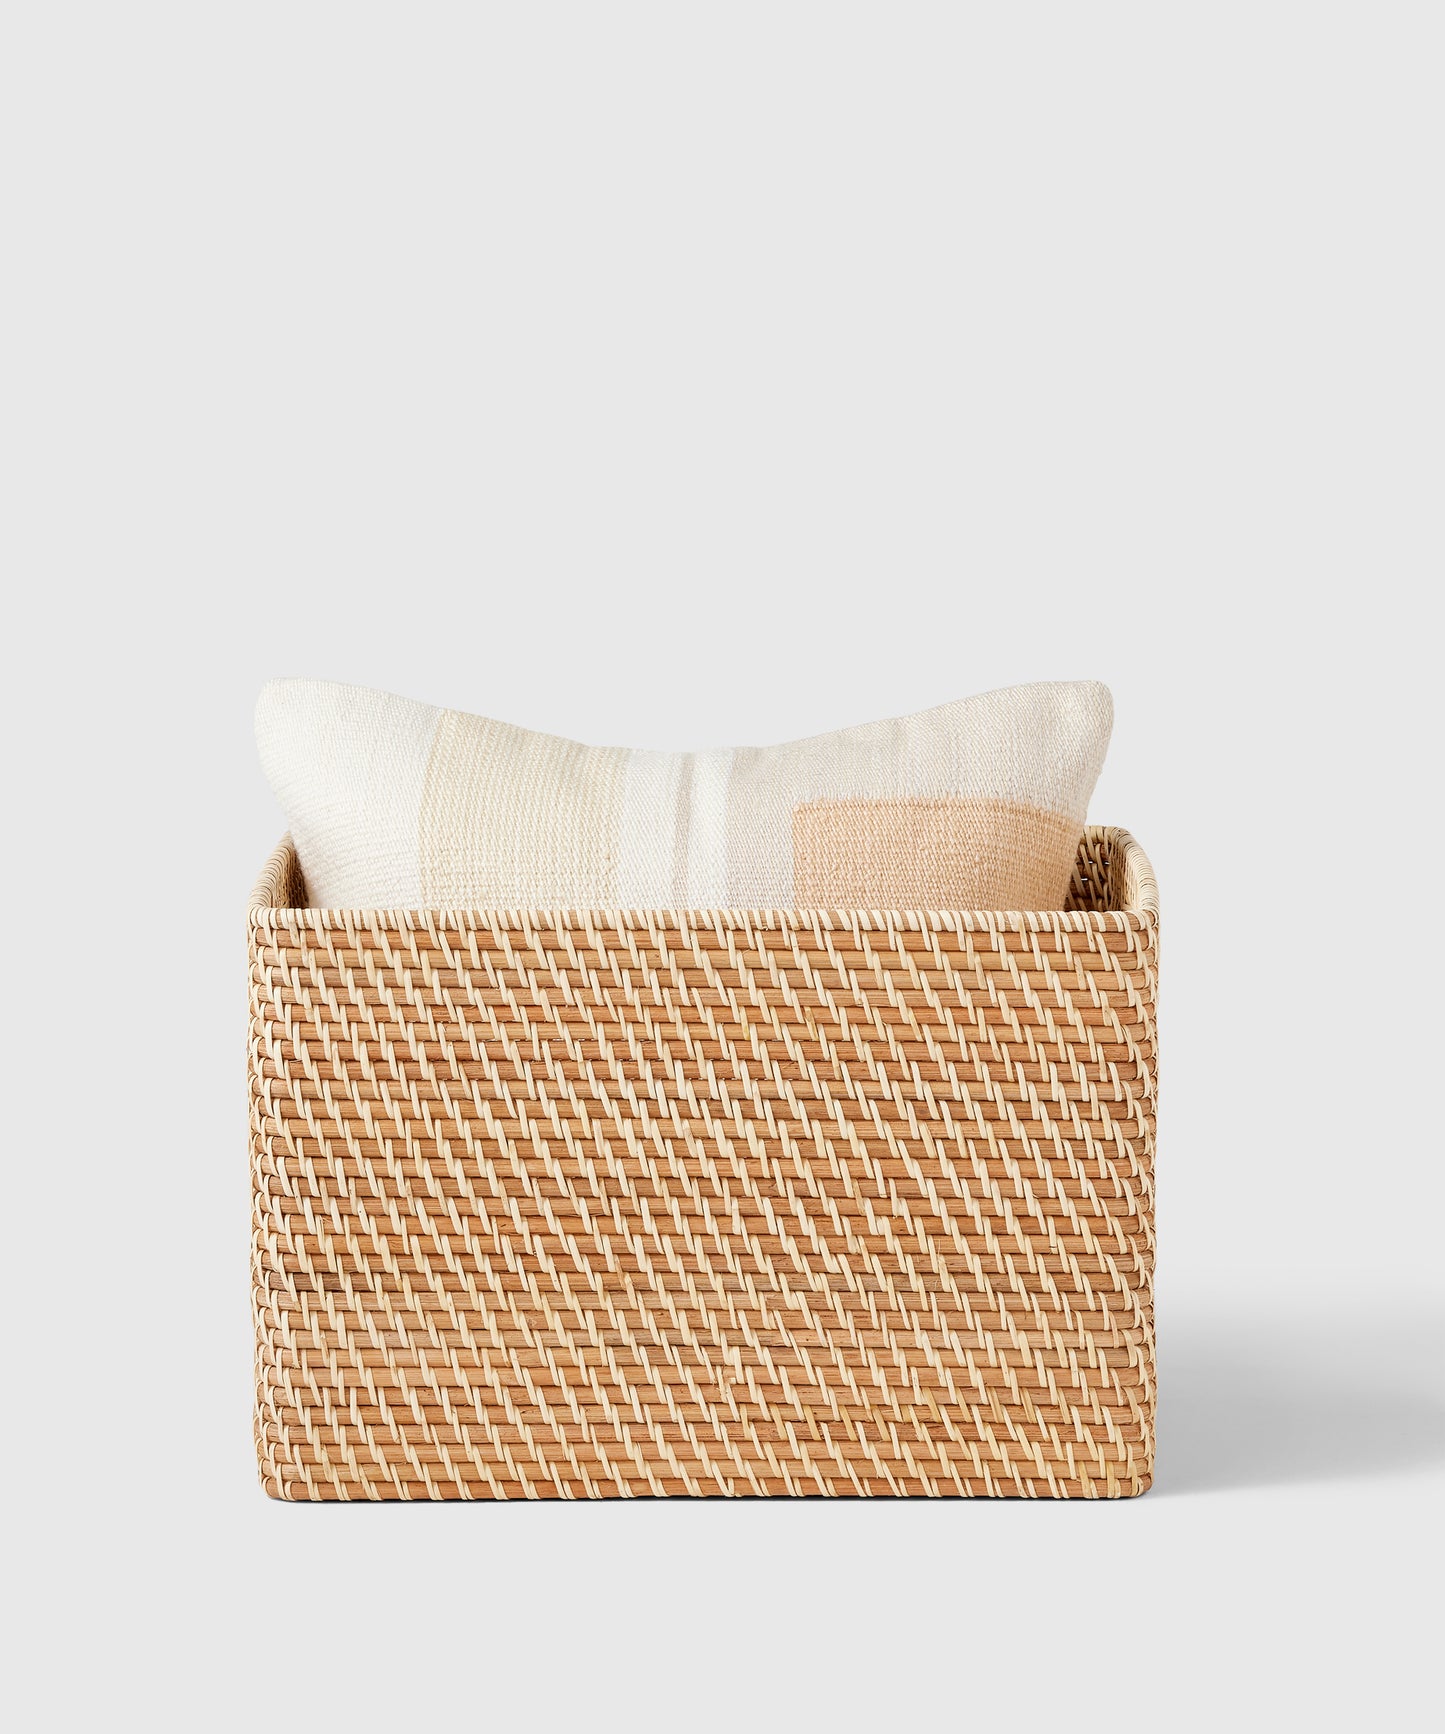 Extra-Large Woven Rattan Bin With Handles | Marie Kondo Official Site